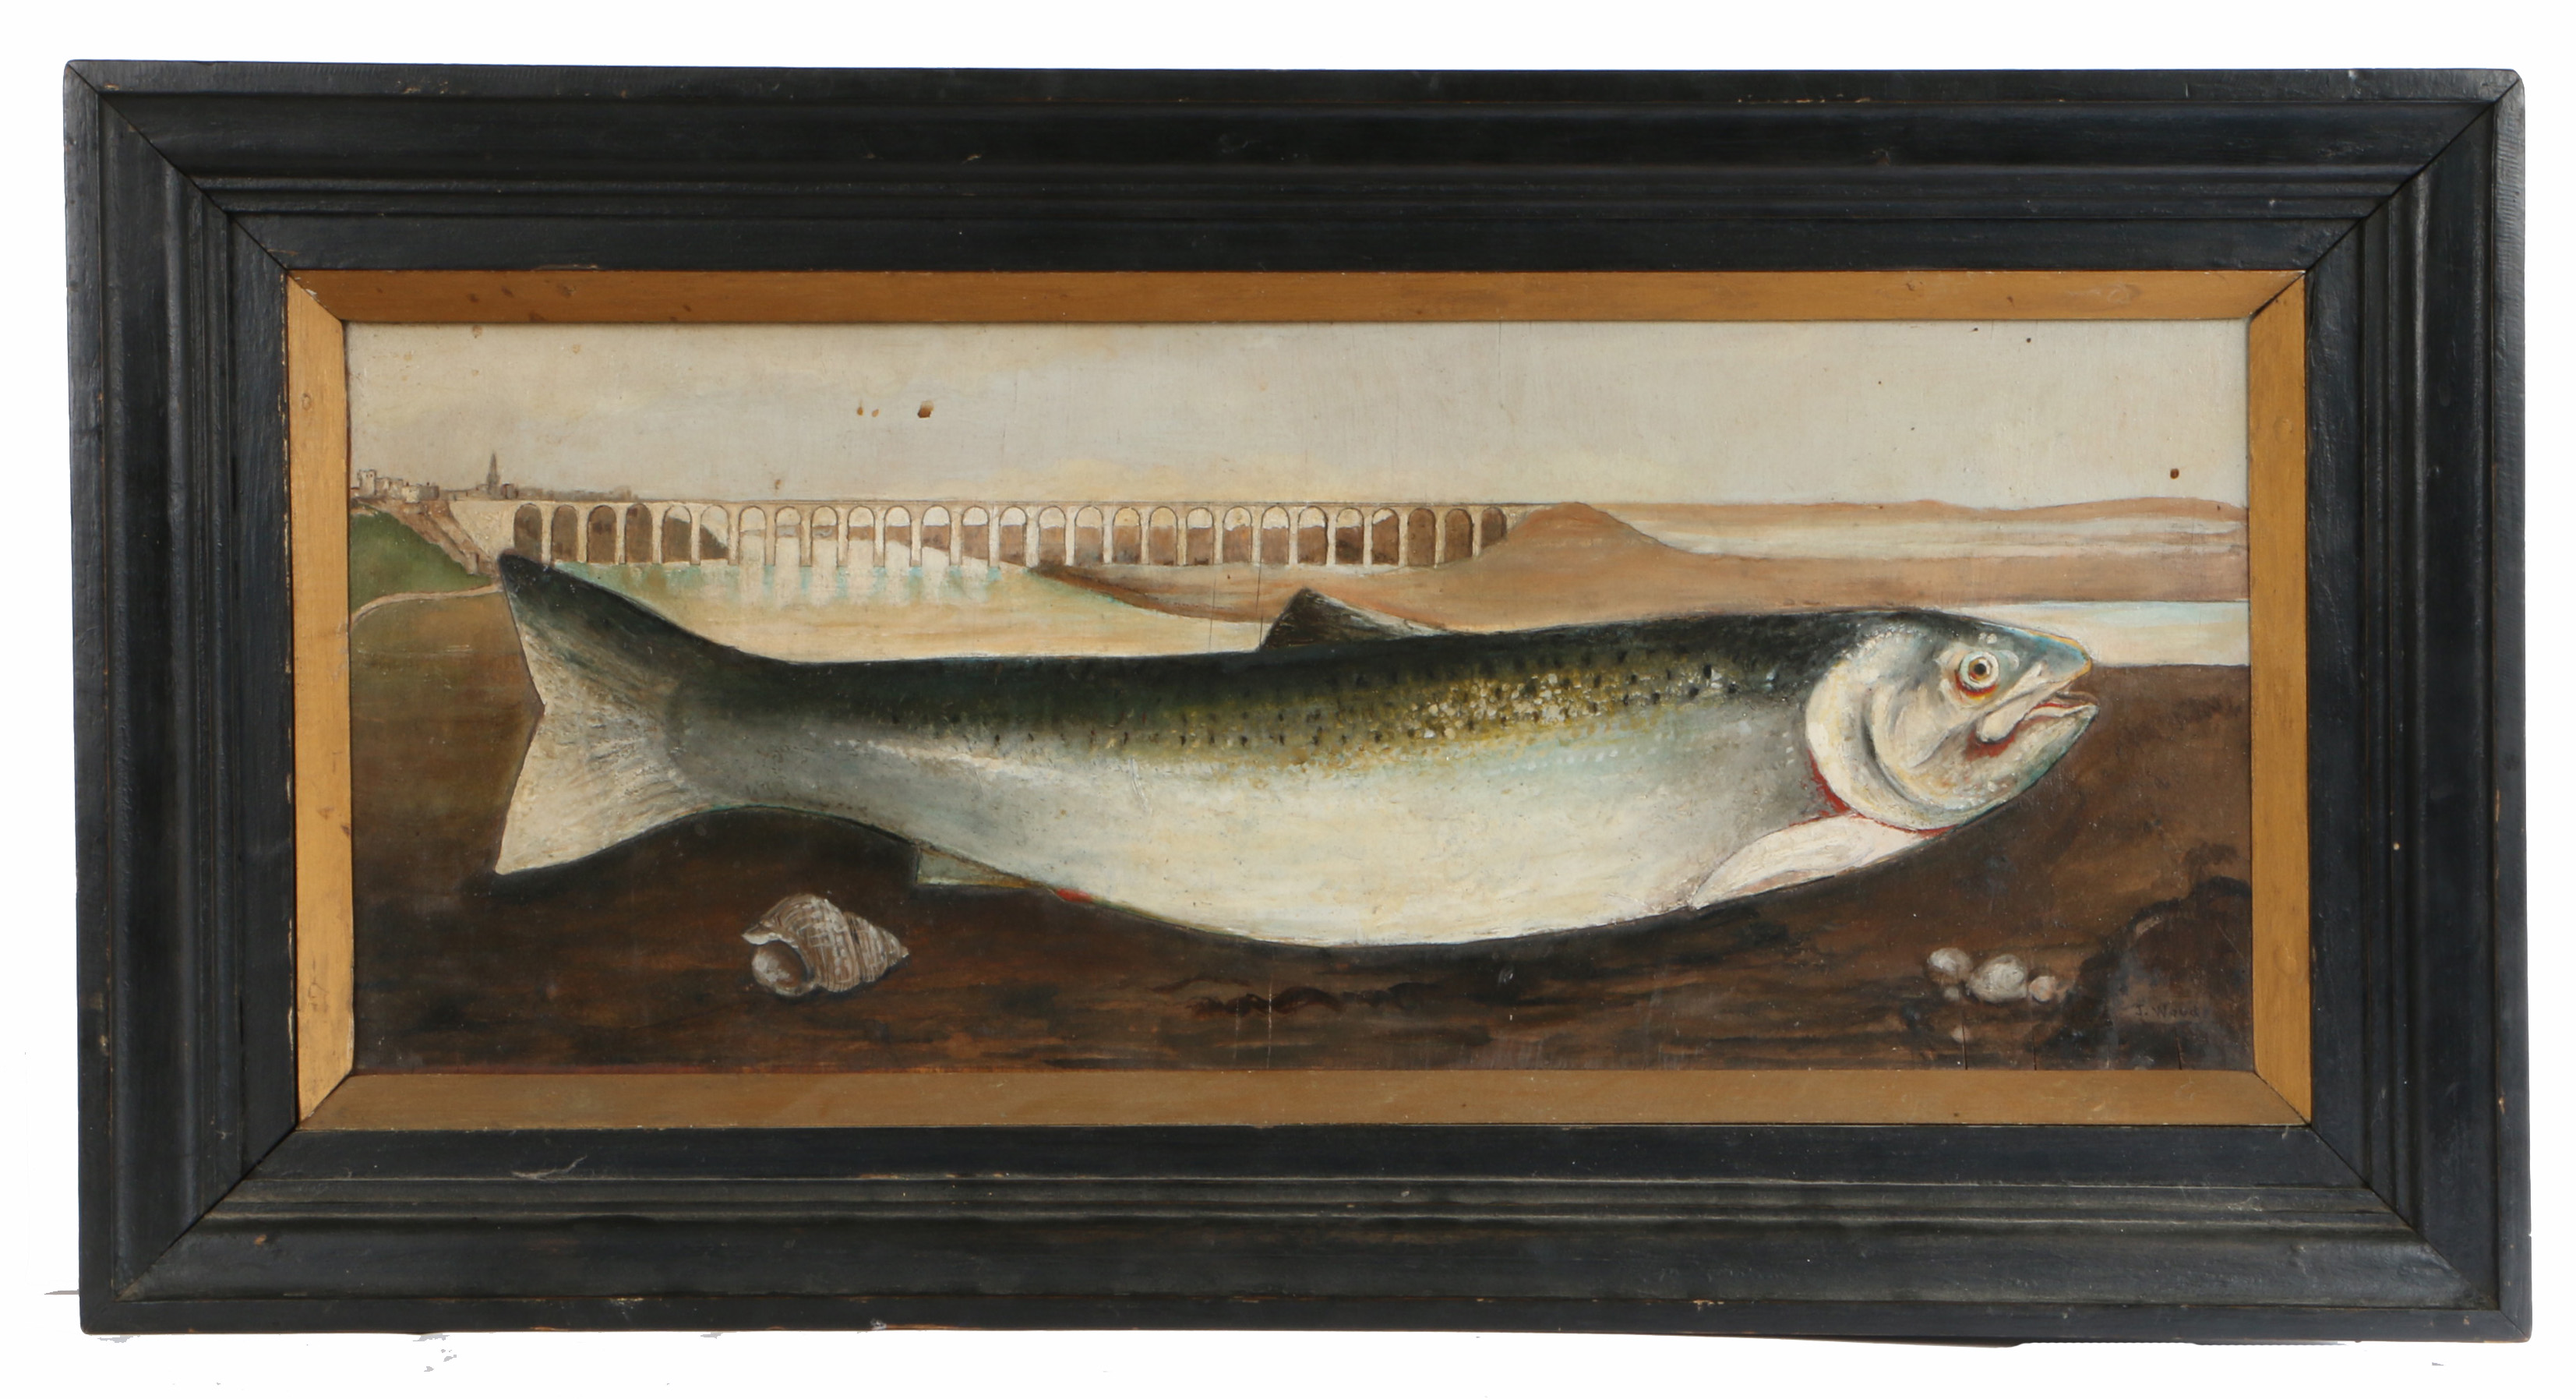 J Wood (20th Century) Fish by a Viaduct, inscribed to reverse "Berwick upon Tweed" Signed (lower